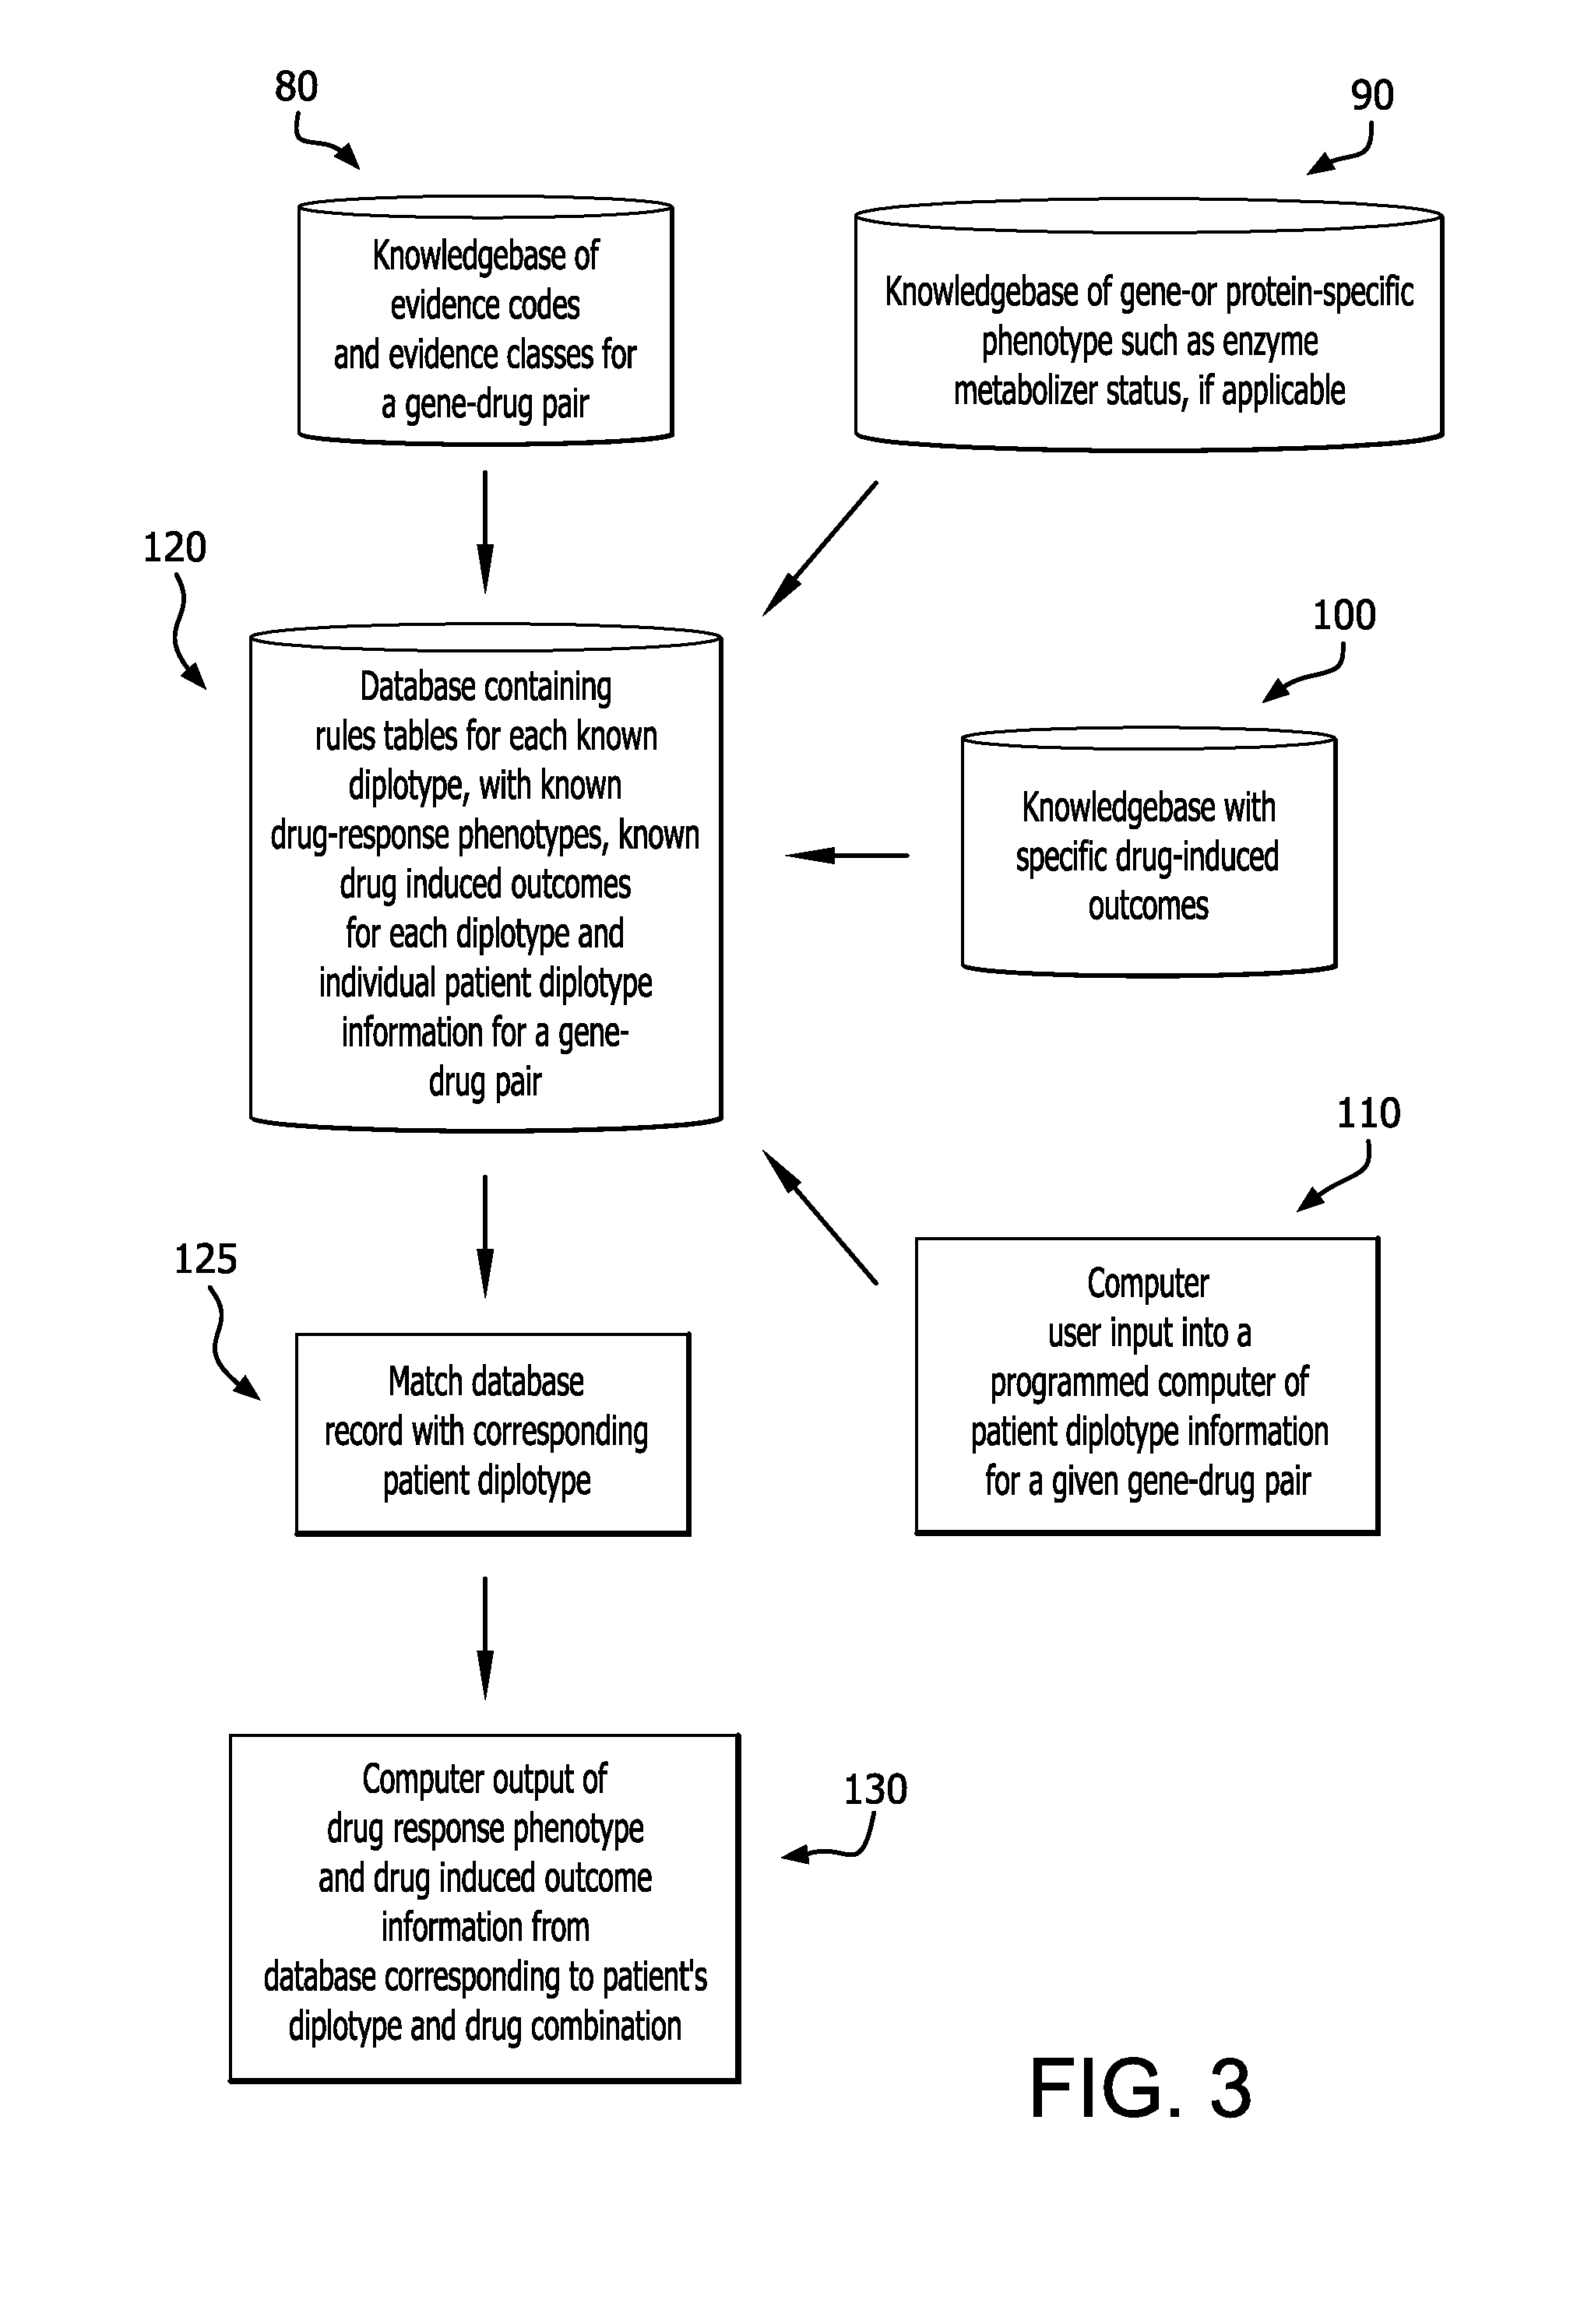 Method for translating genetic information for use in pharmacogenomic molecular diagnostics and personalized medicine research